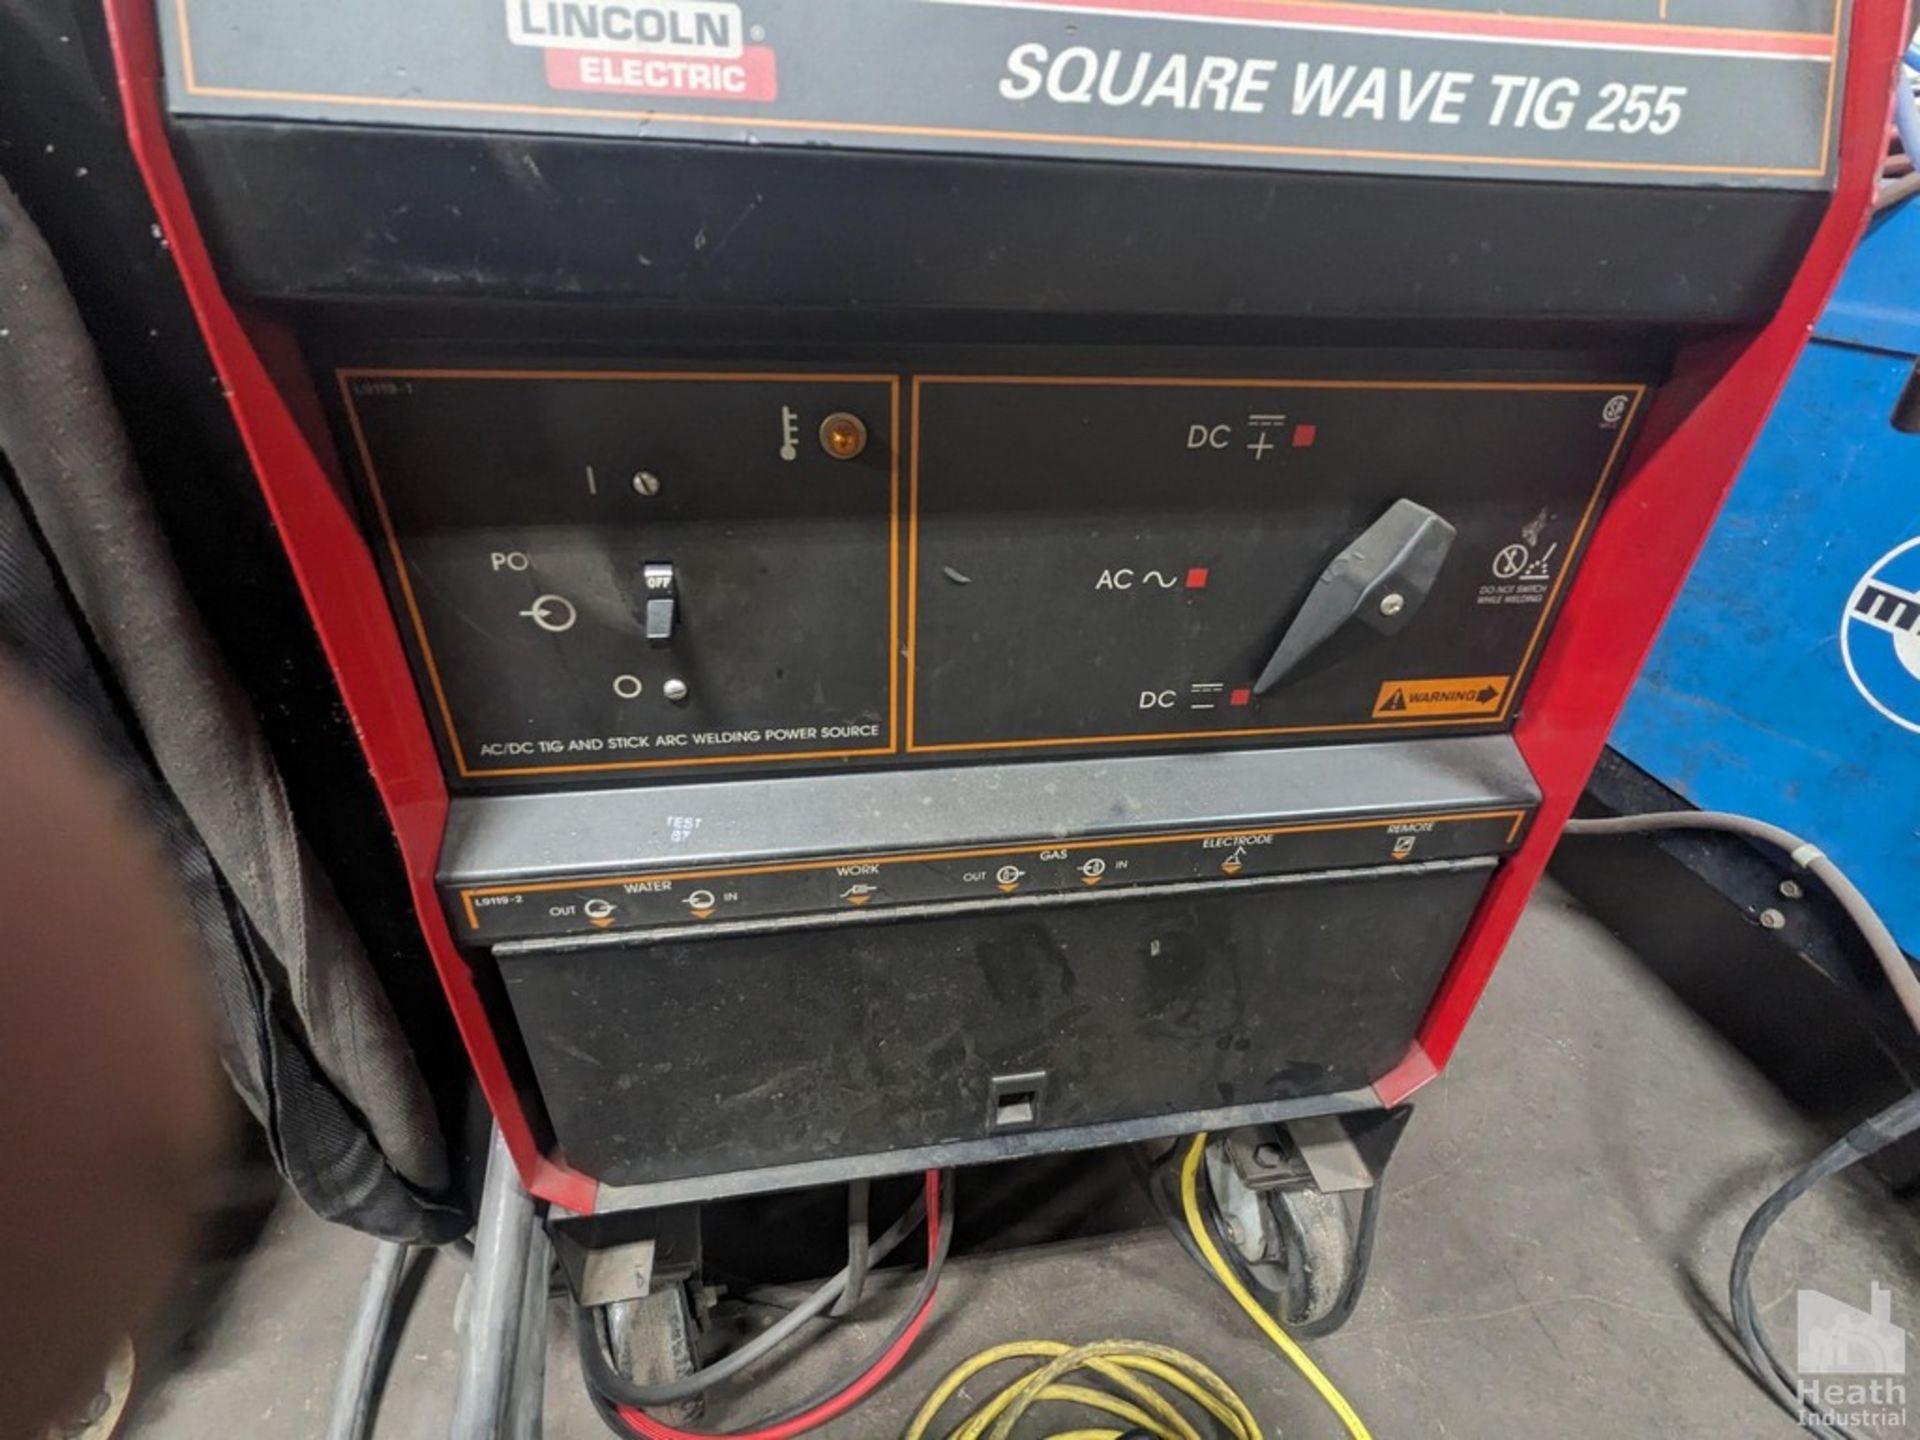 LINCOLN ELECTRIC SQUARE WAVE TIG 255 WELDER 10022-U1960105125 WITH TWECO TC900 WATER COOLER, FOOT - Image 5 of 6